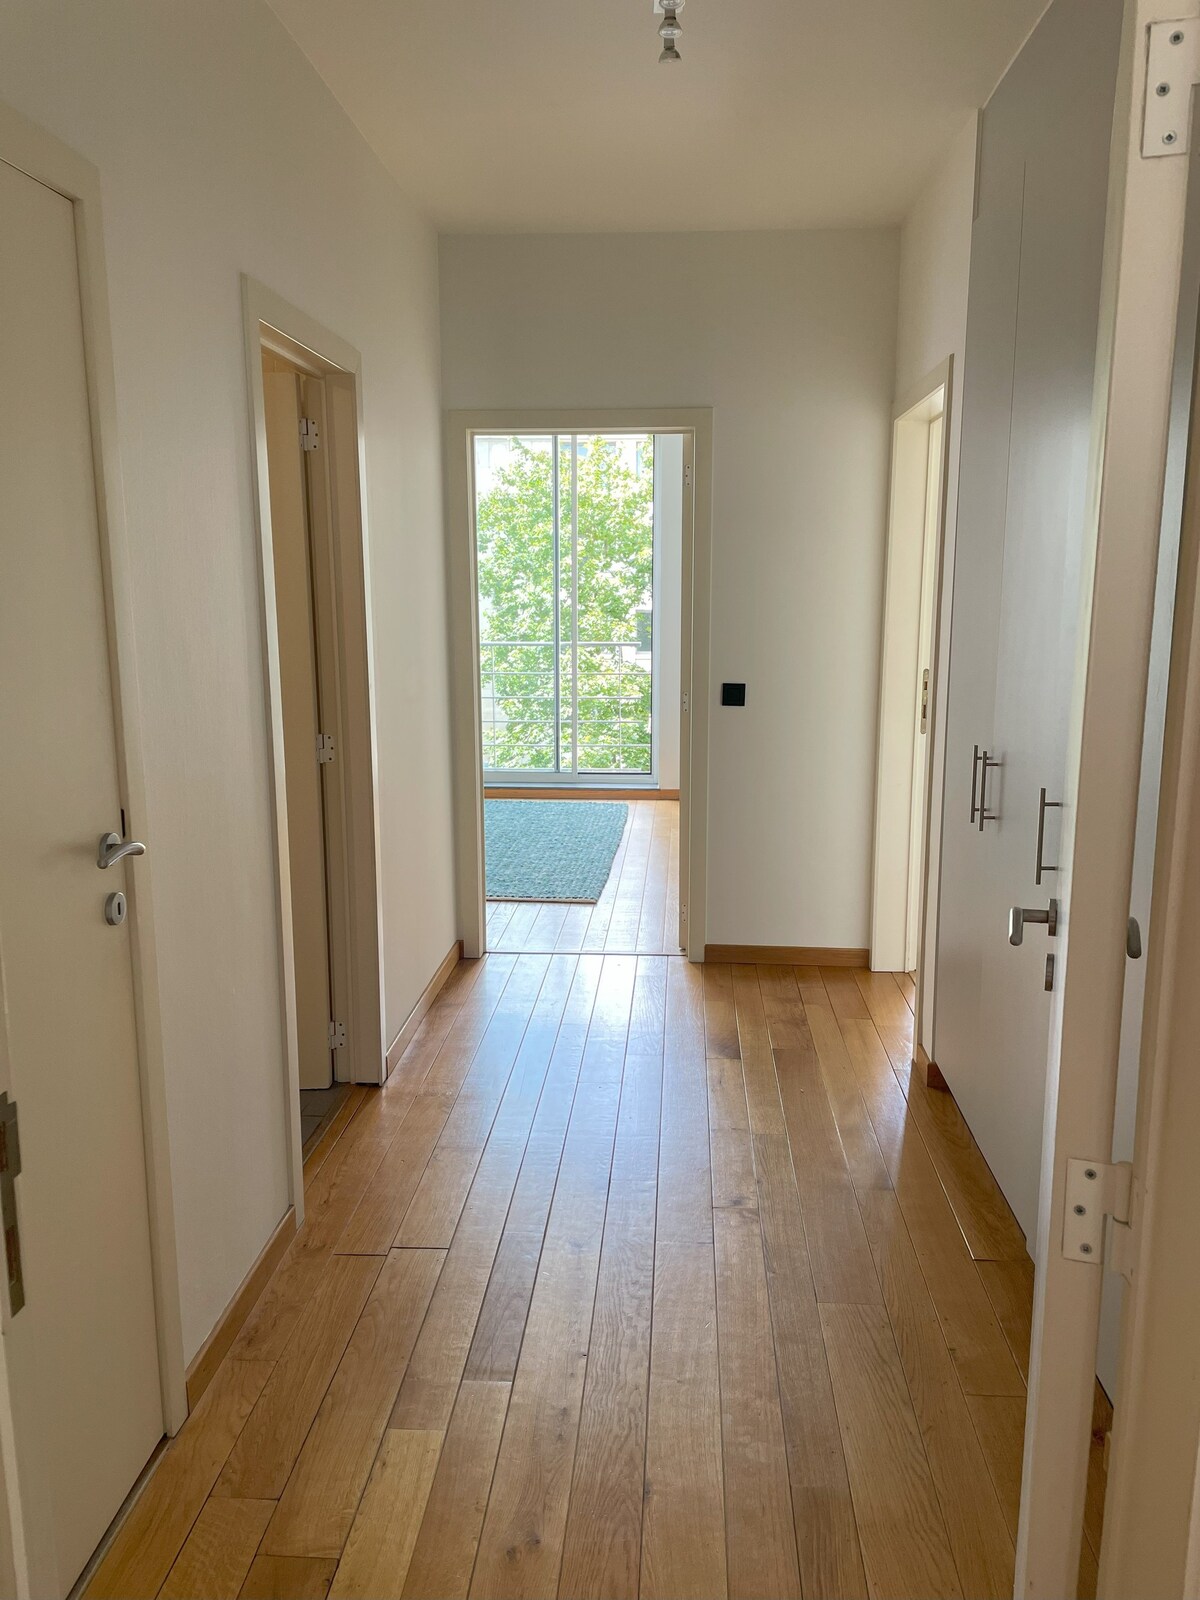 Sunny 3BR apartment in heart of Sablon Brussels